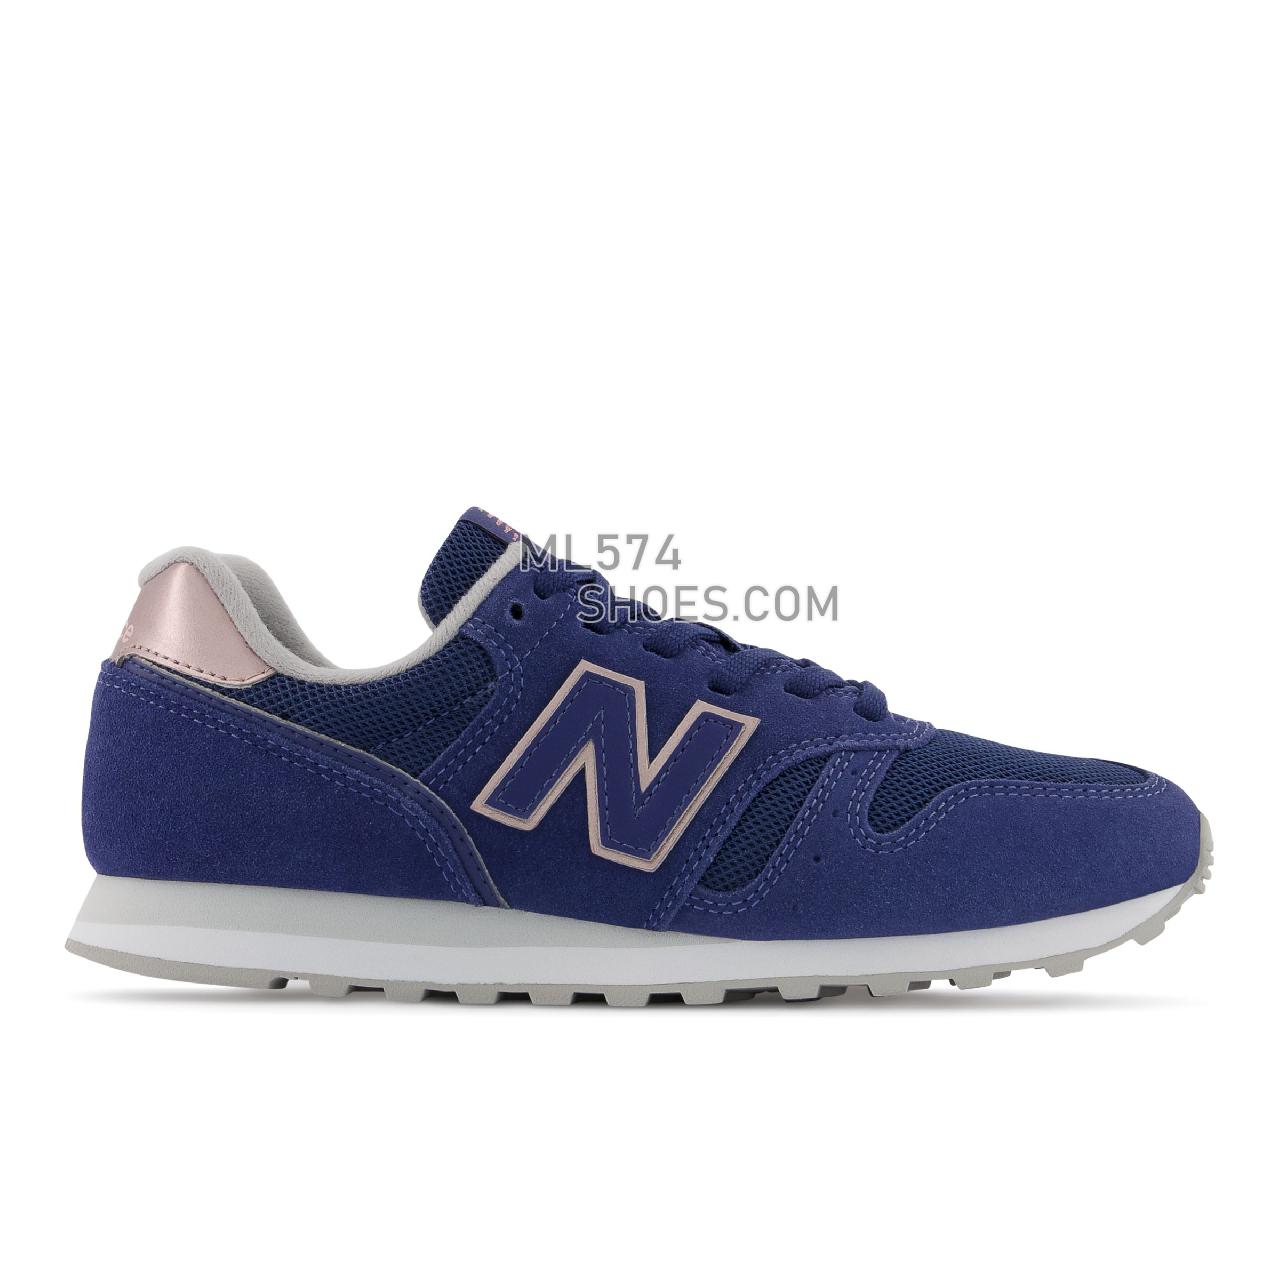 New Balance 373v2 - Women's Classic Sneakers - Moon Shadow with Pink Metallic - WL373FP2